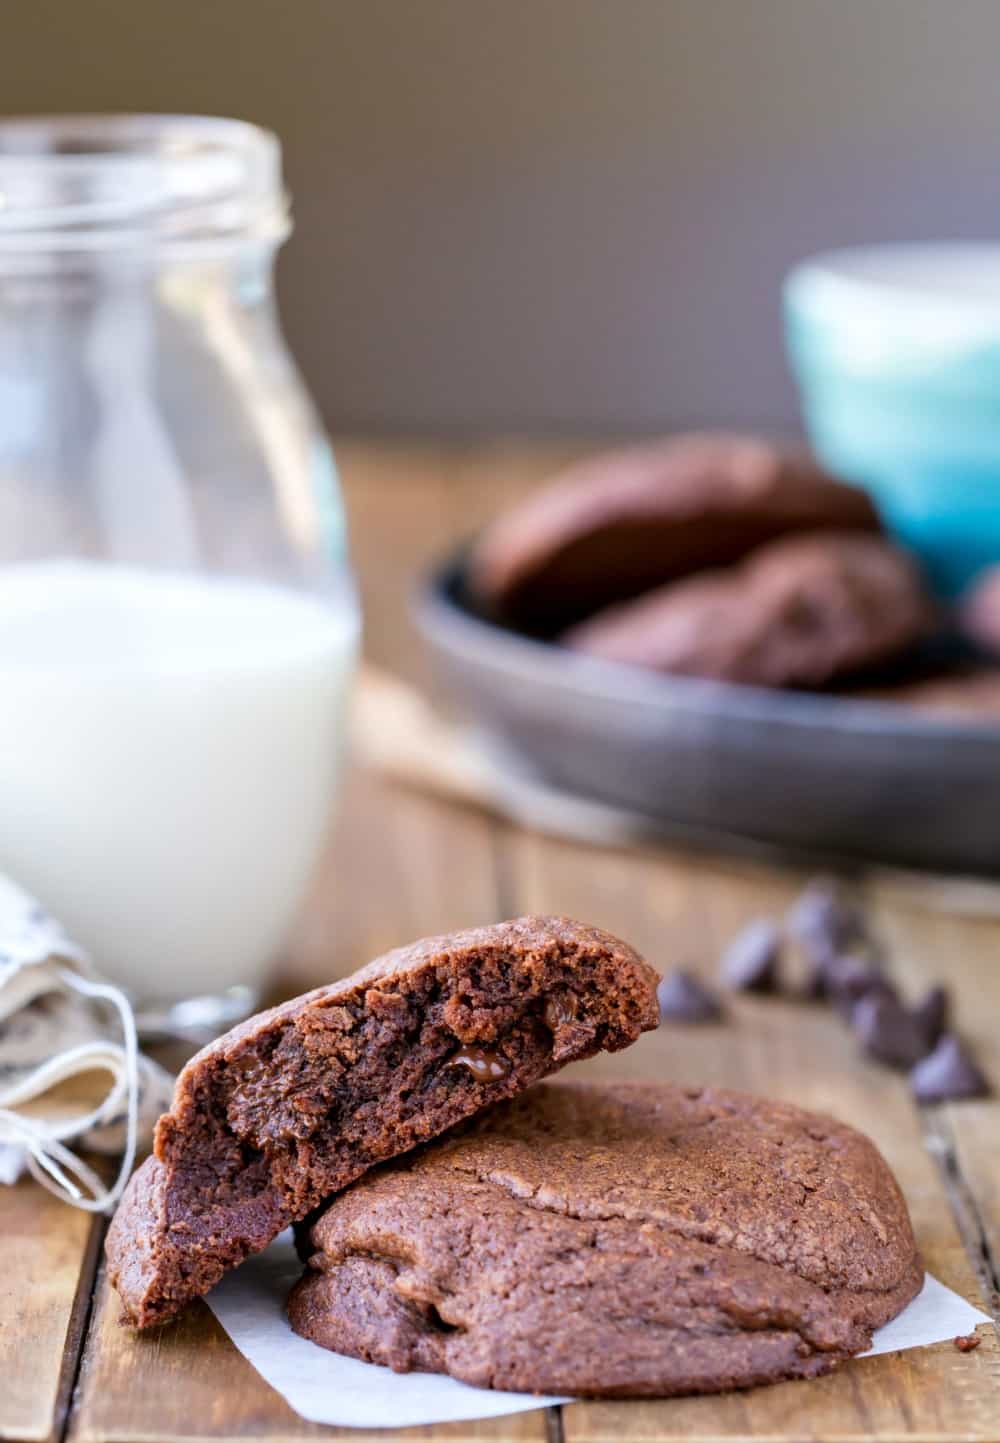 Bakery Style Double Chocolate Chip Cookies on a piece of parchment paper next to a glass of milk